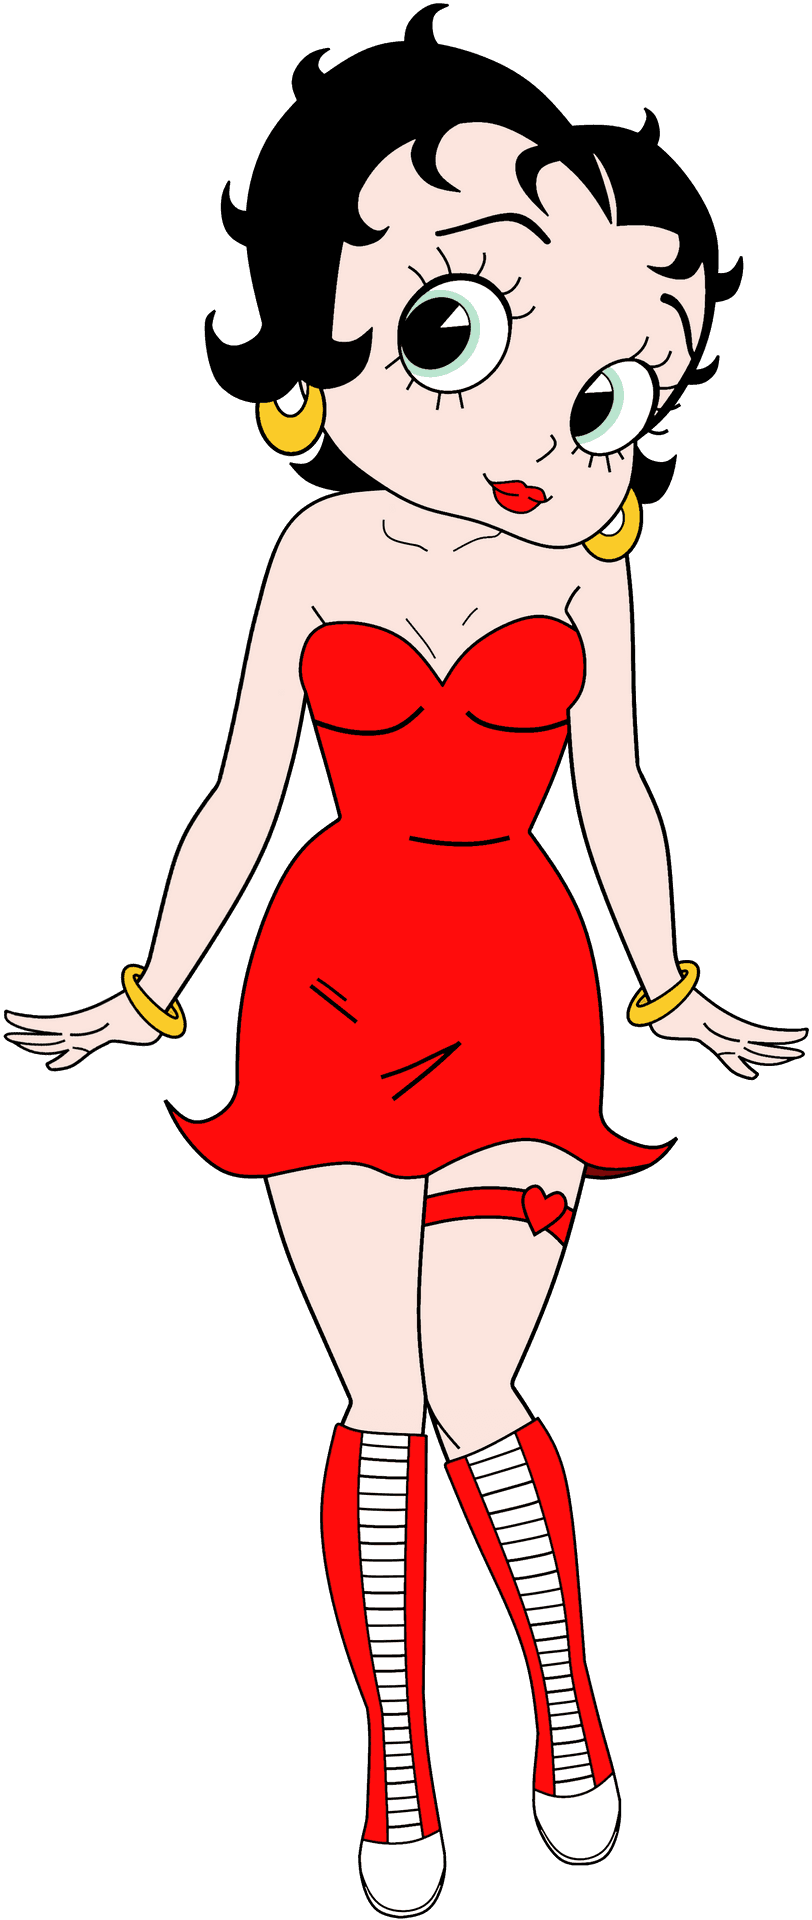 Download Betty Boop Making Her Signature Wink | Wallpapers.com